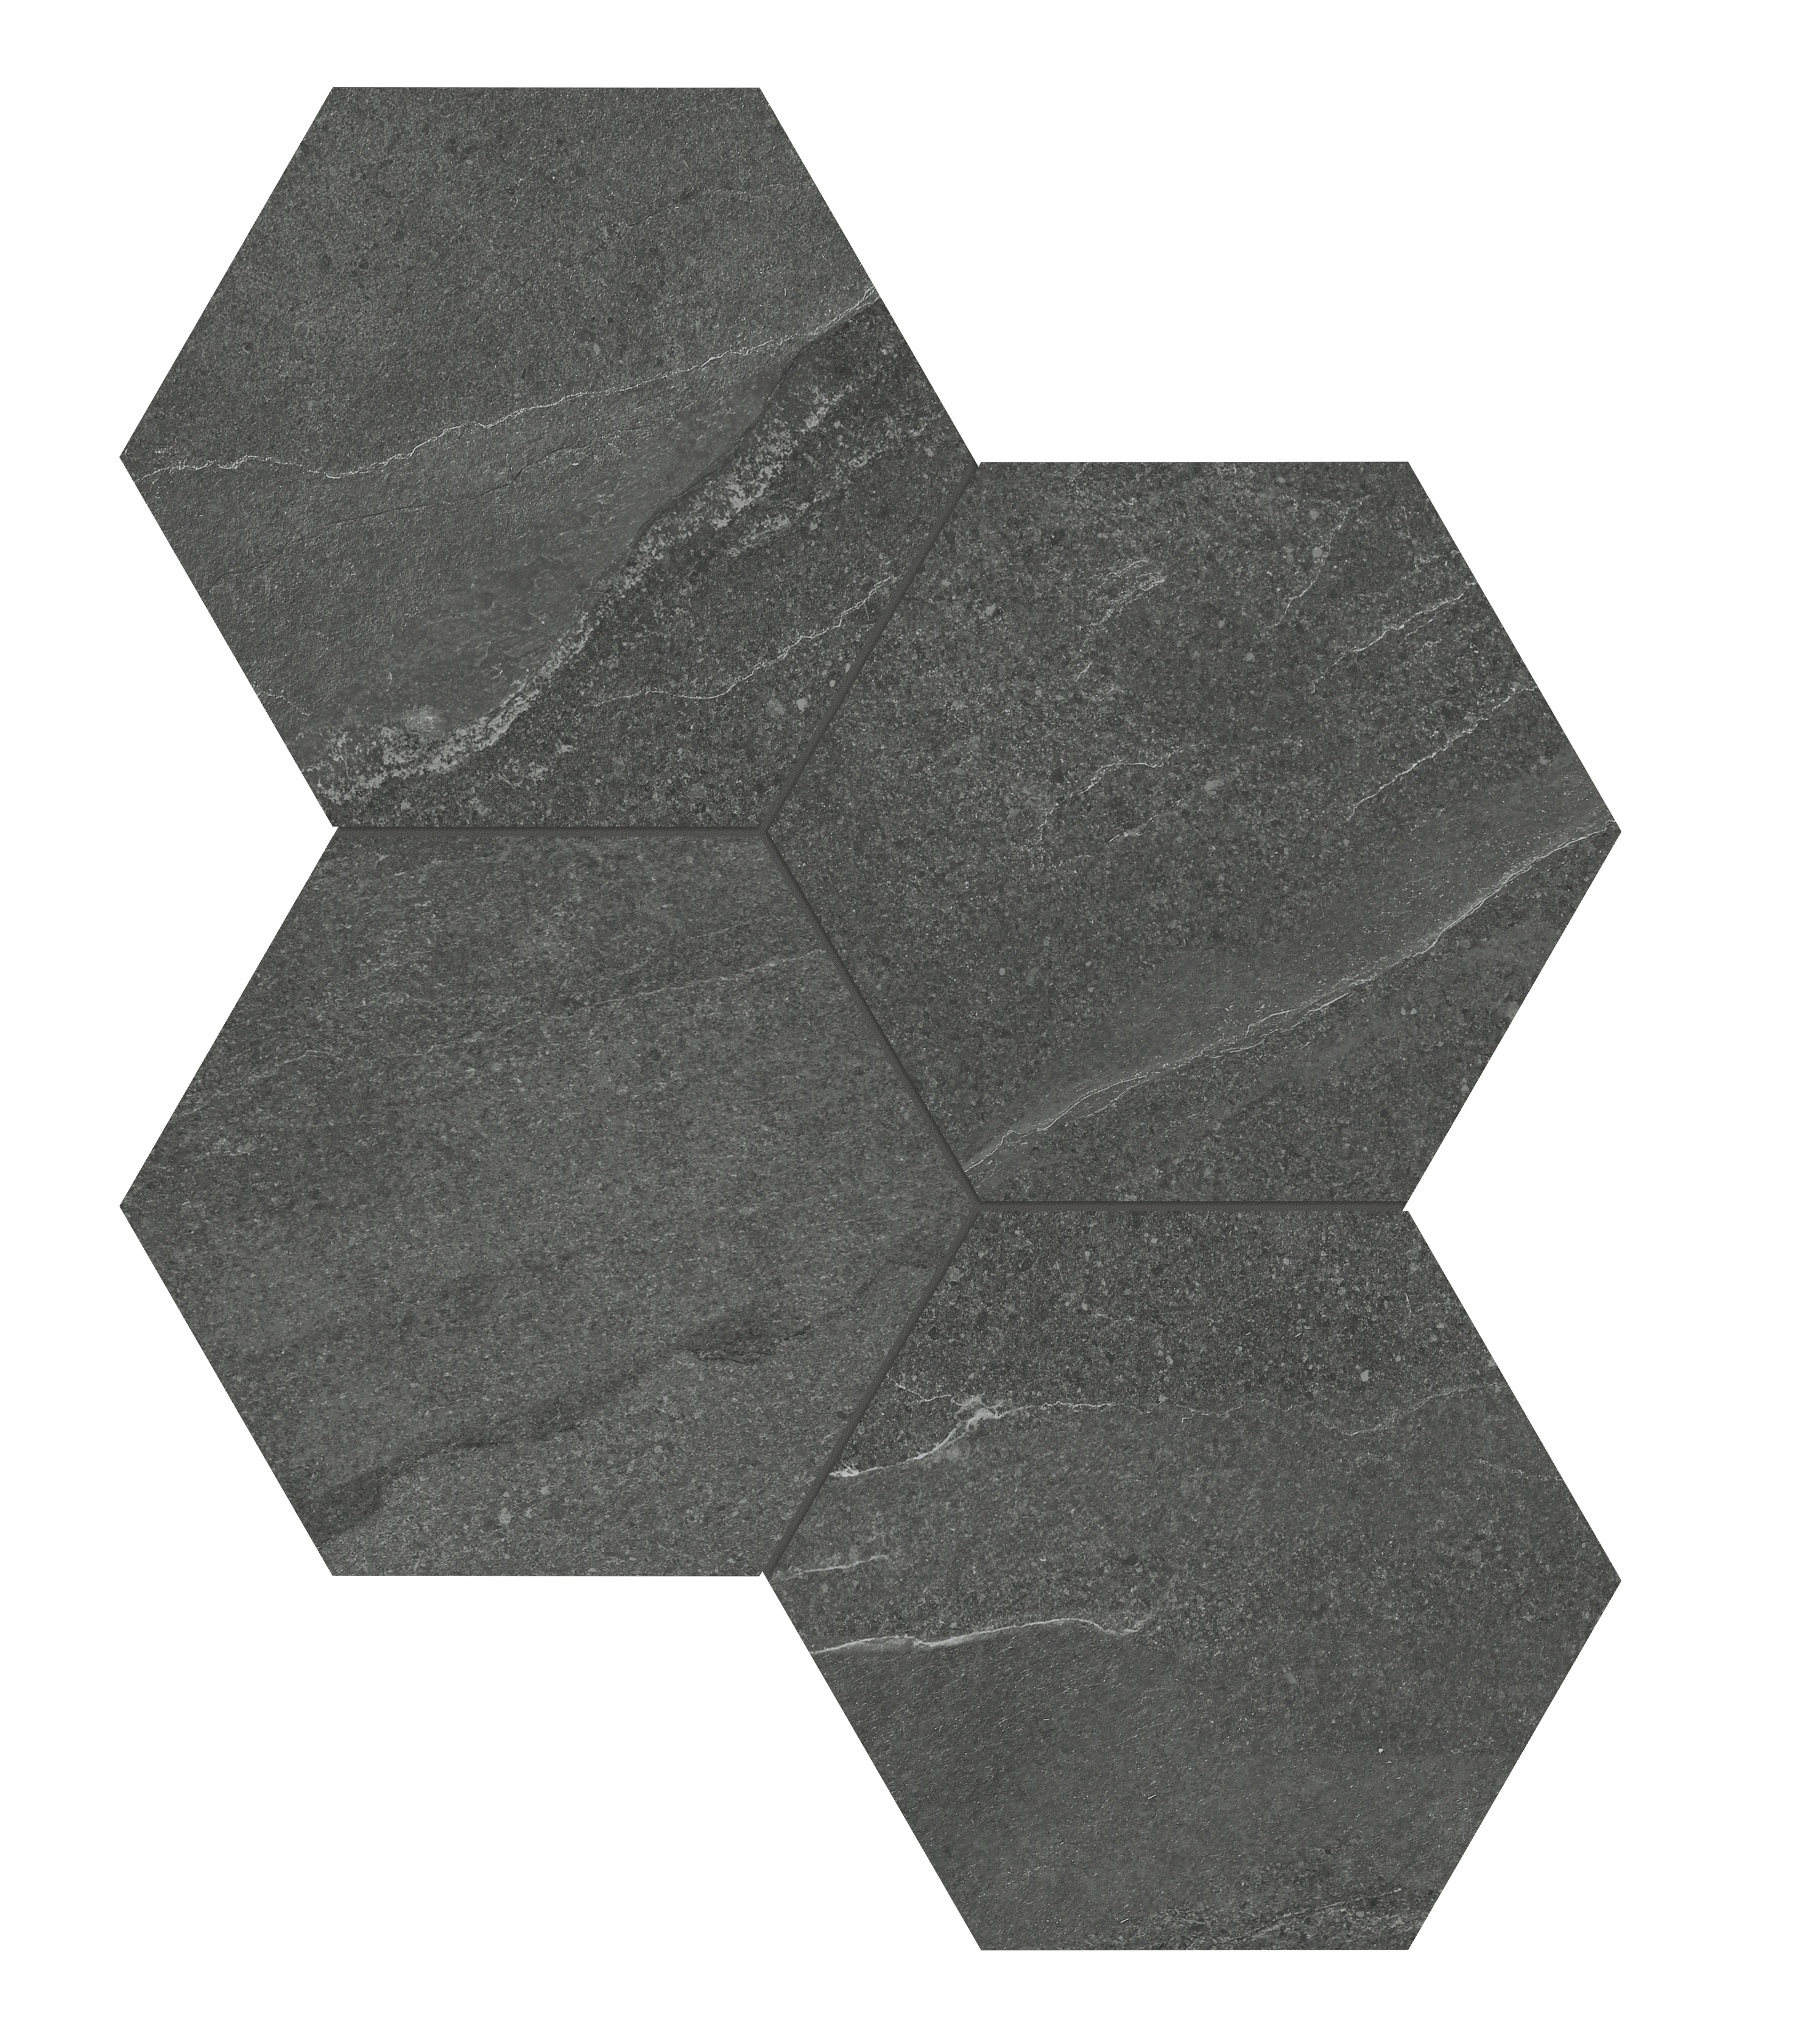 carbon hexagon 6-inch pattern color body porcelain mosaic from nord anatolia collection distributed by surface group international matte finish straight edge edge mesh shape